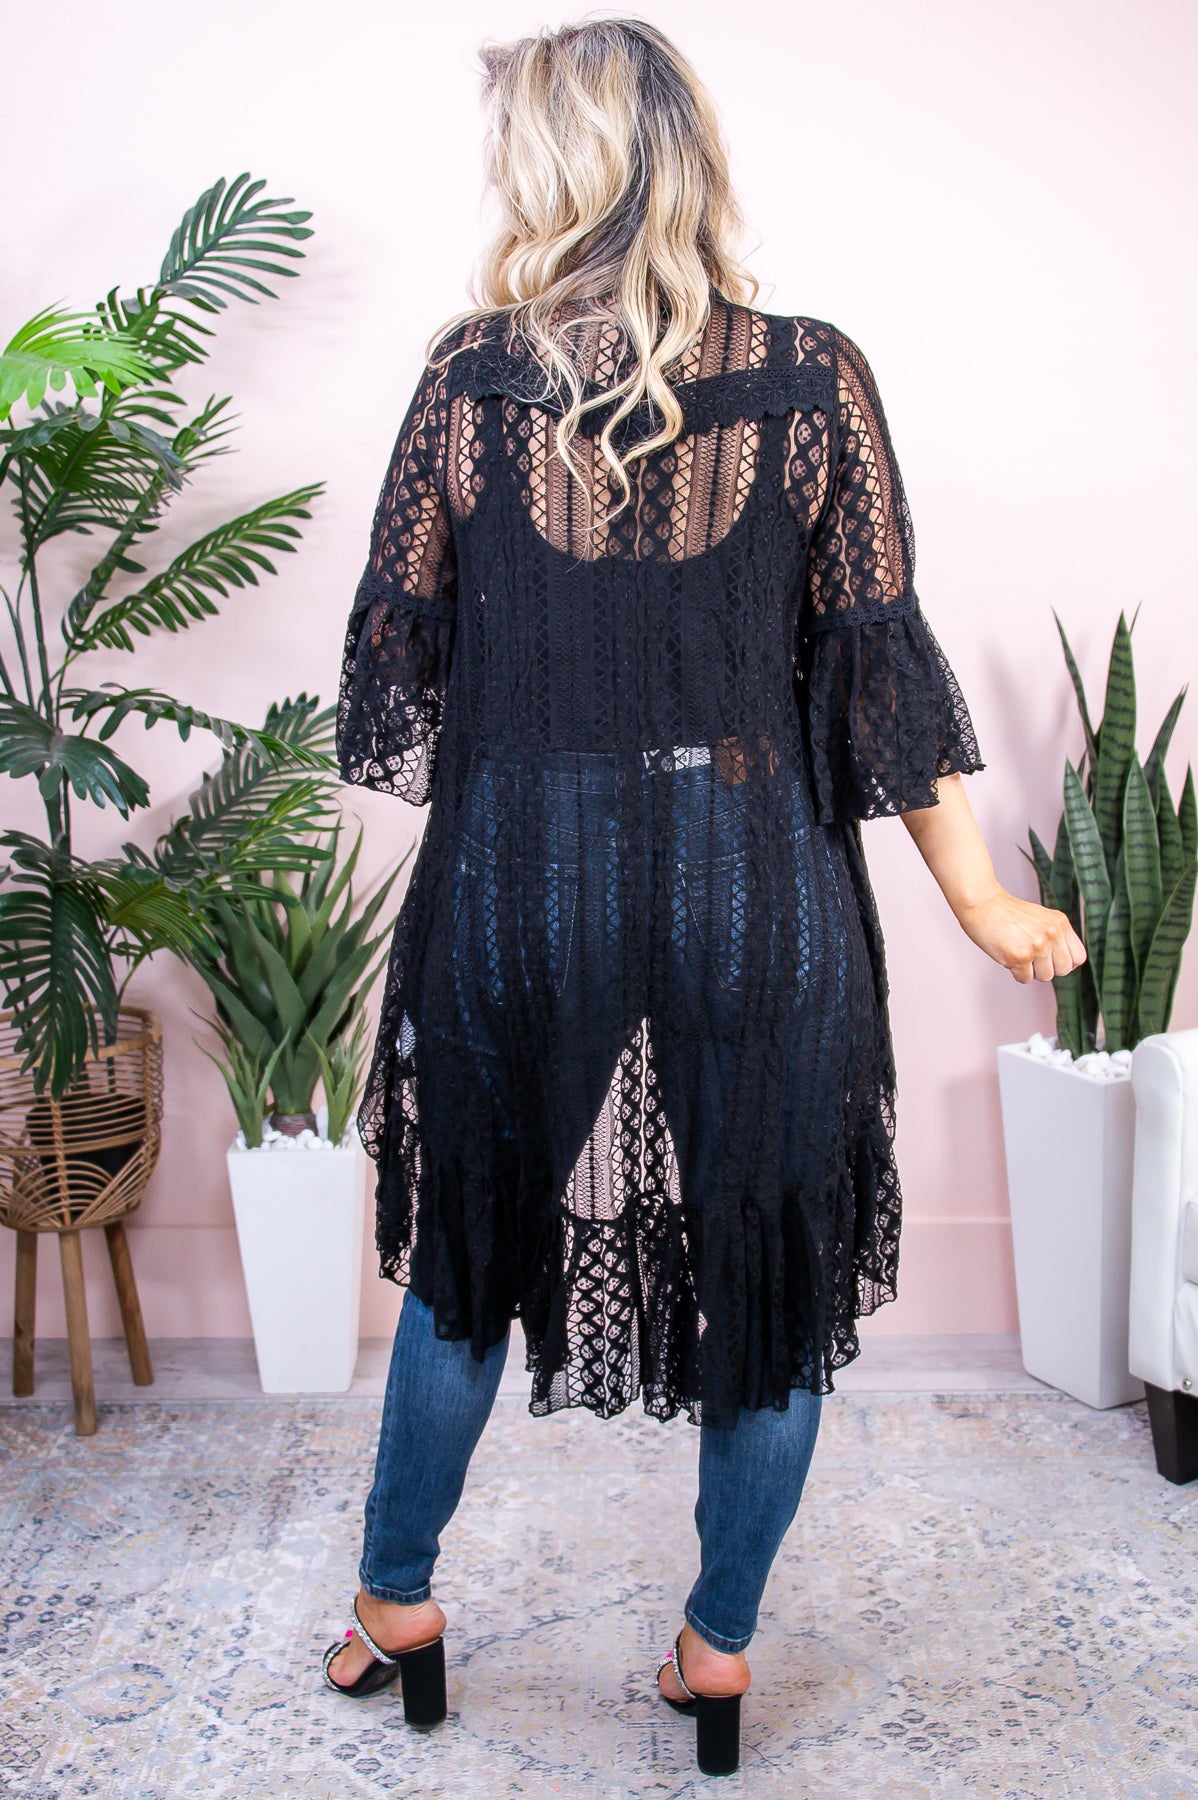 Easy On The Eyes Black Solid Lace High-Low Long Kimono - O5331BK